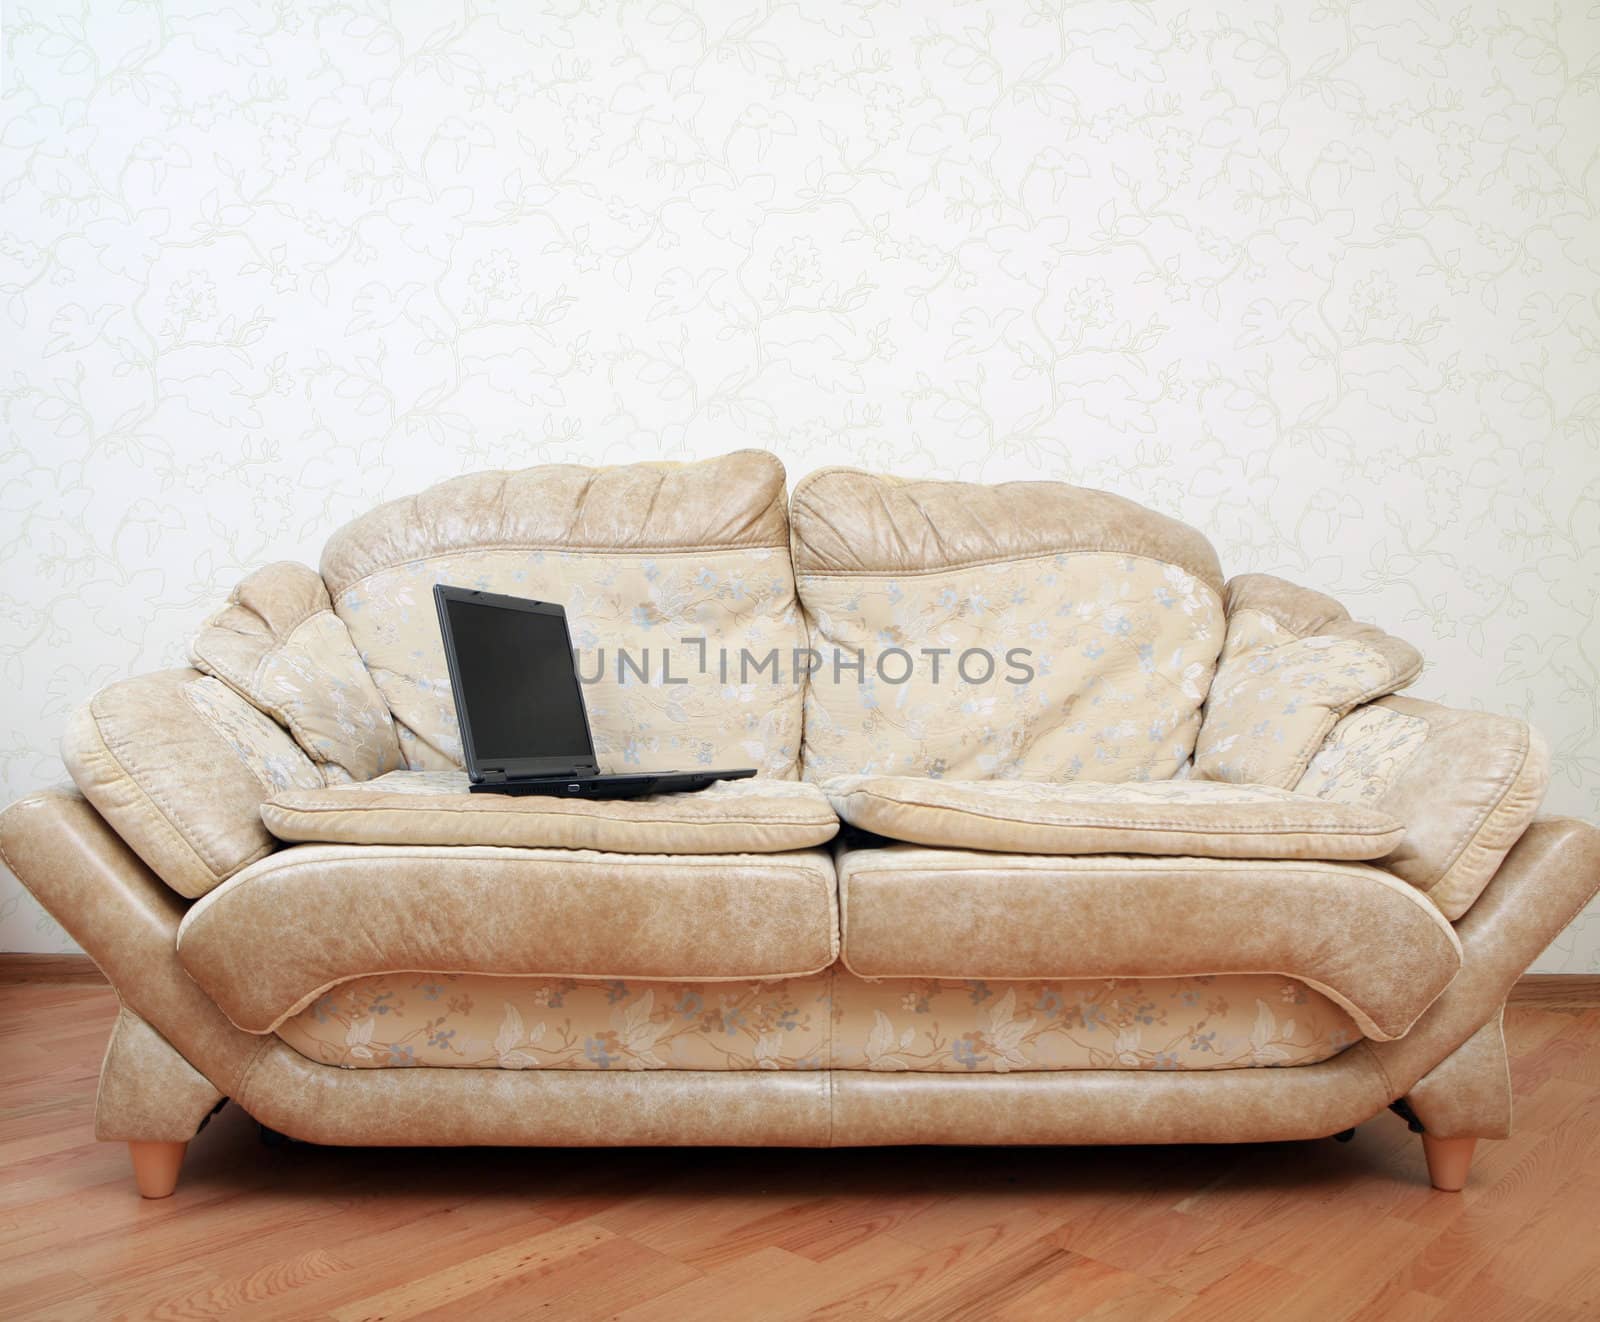 An image of a comfortable light couch